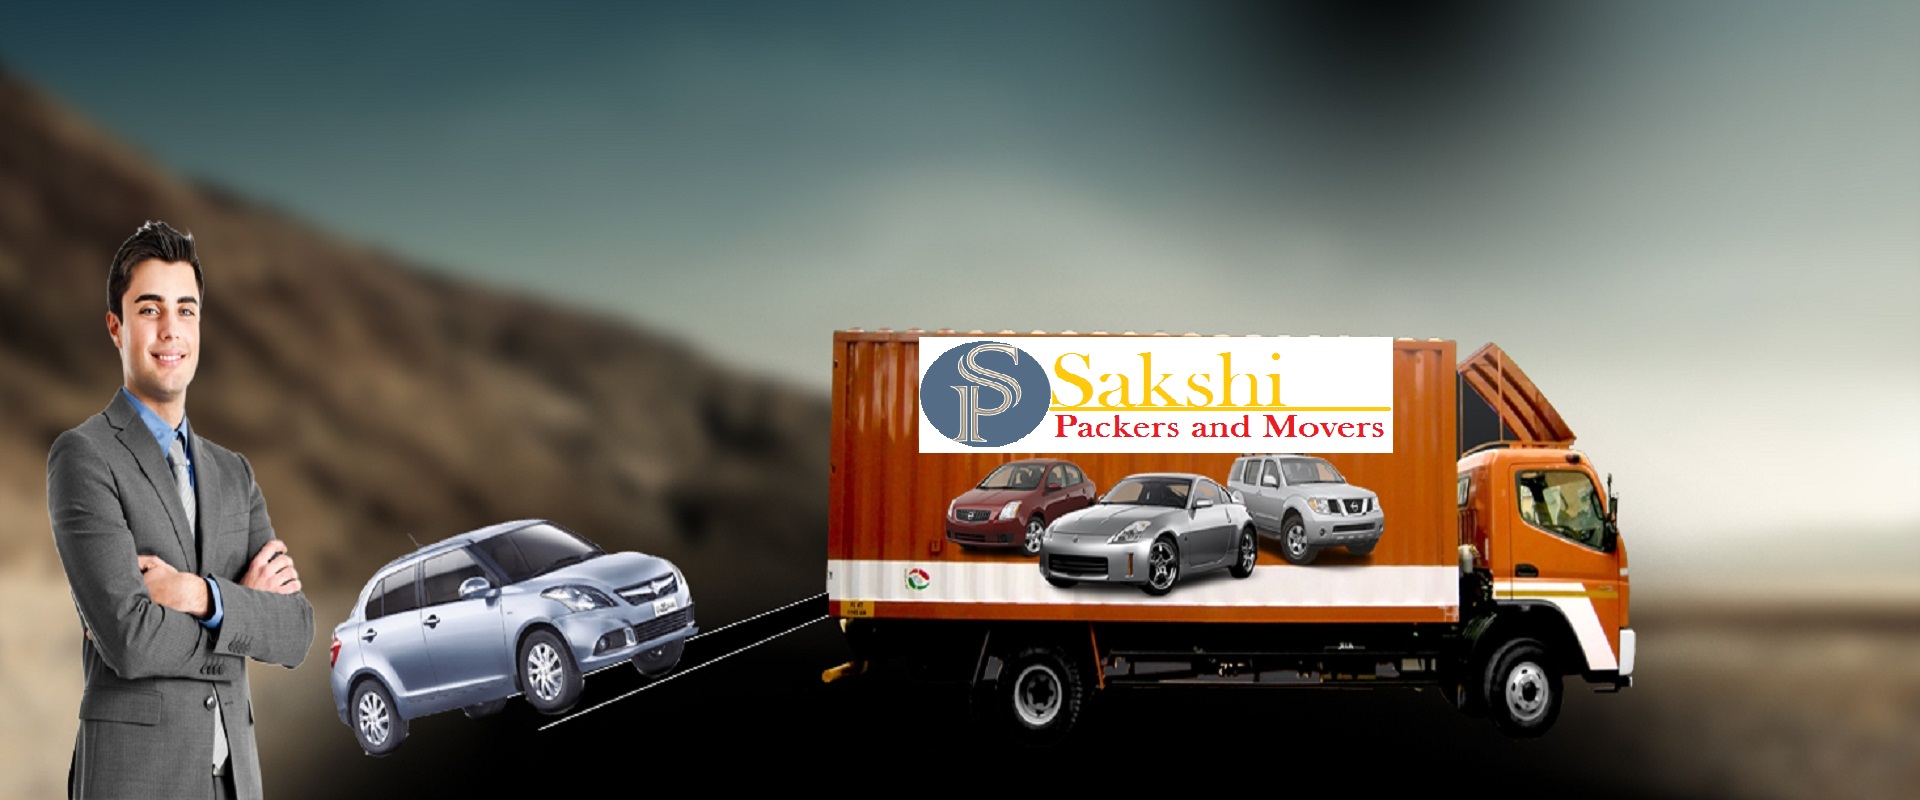 Packers and Movers Rajahmundry